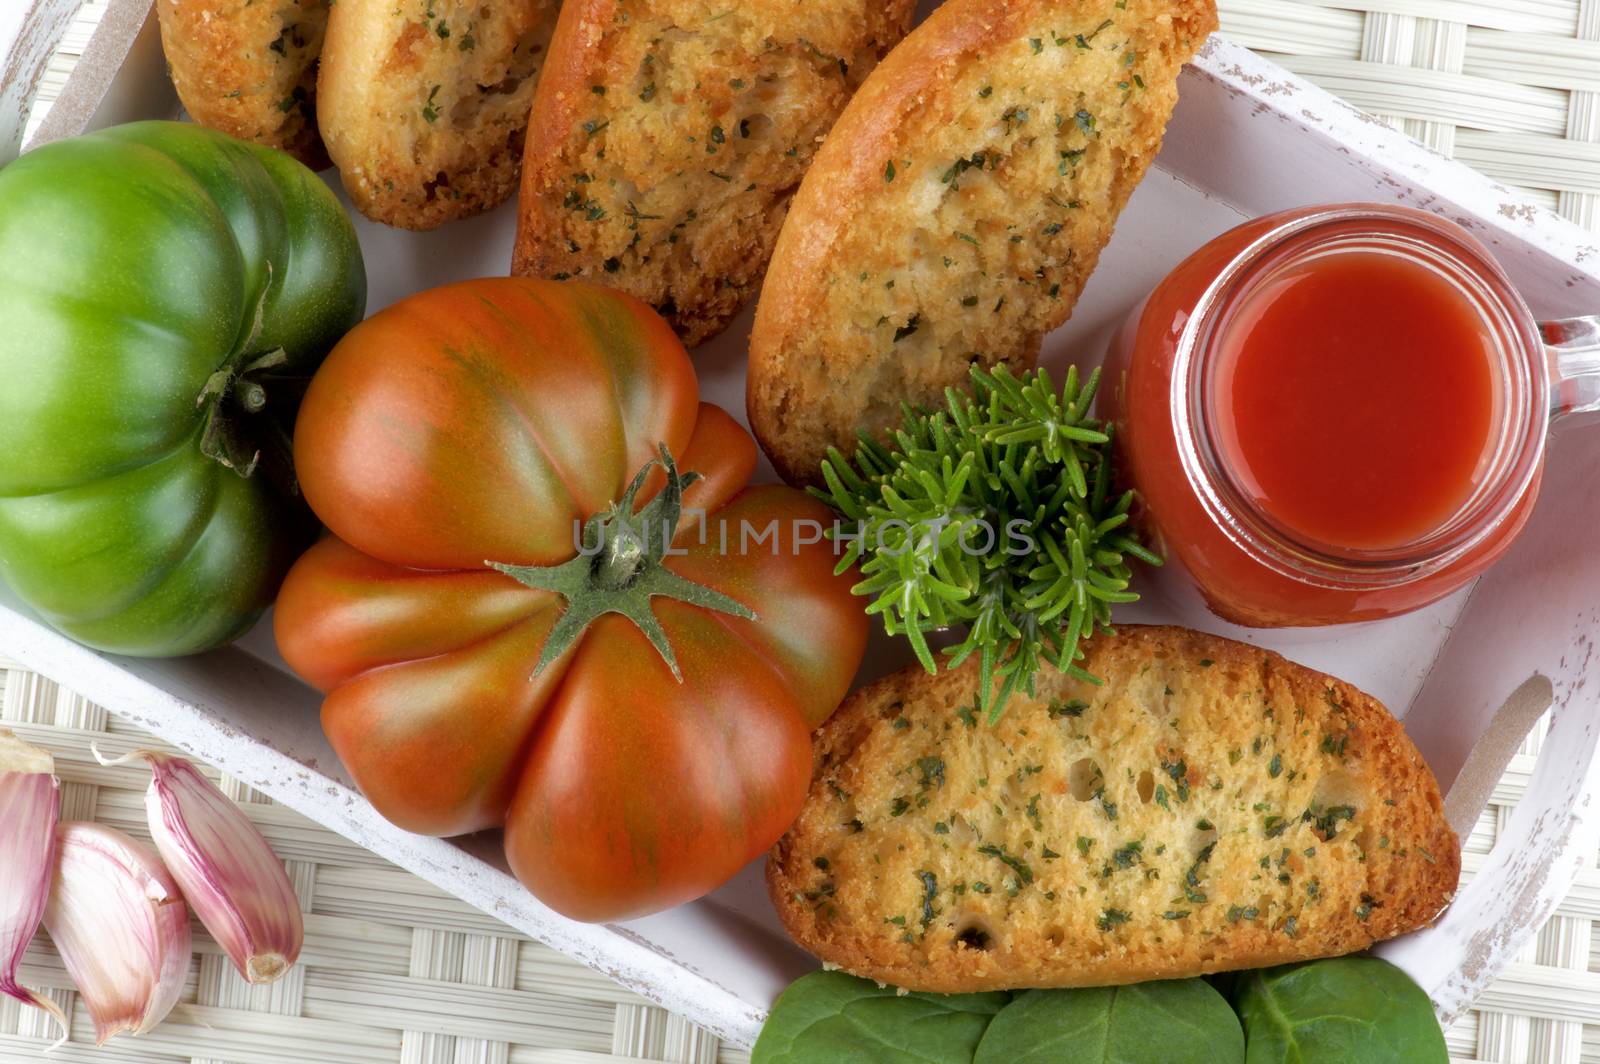 Tomato Juice in Glass Jar with Raw Tomatoes, Crispy Bread and Fresh Herbs closeup into White Wooden Tray. Top View on Wicker background